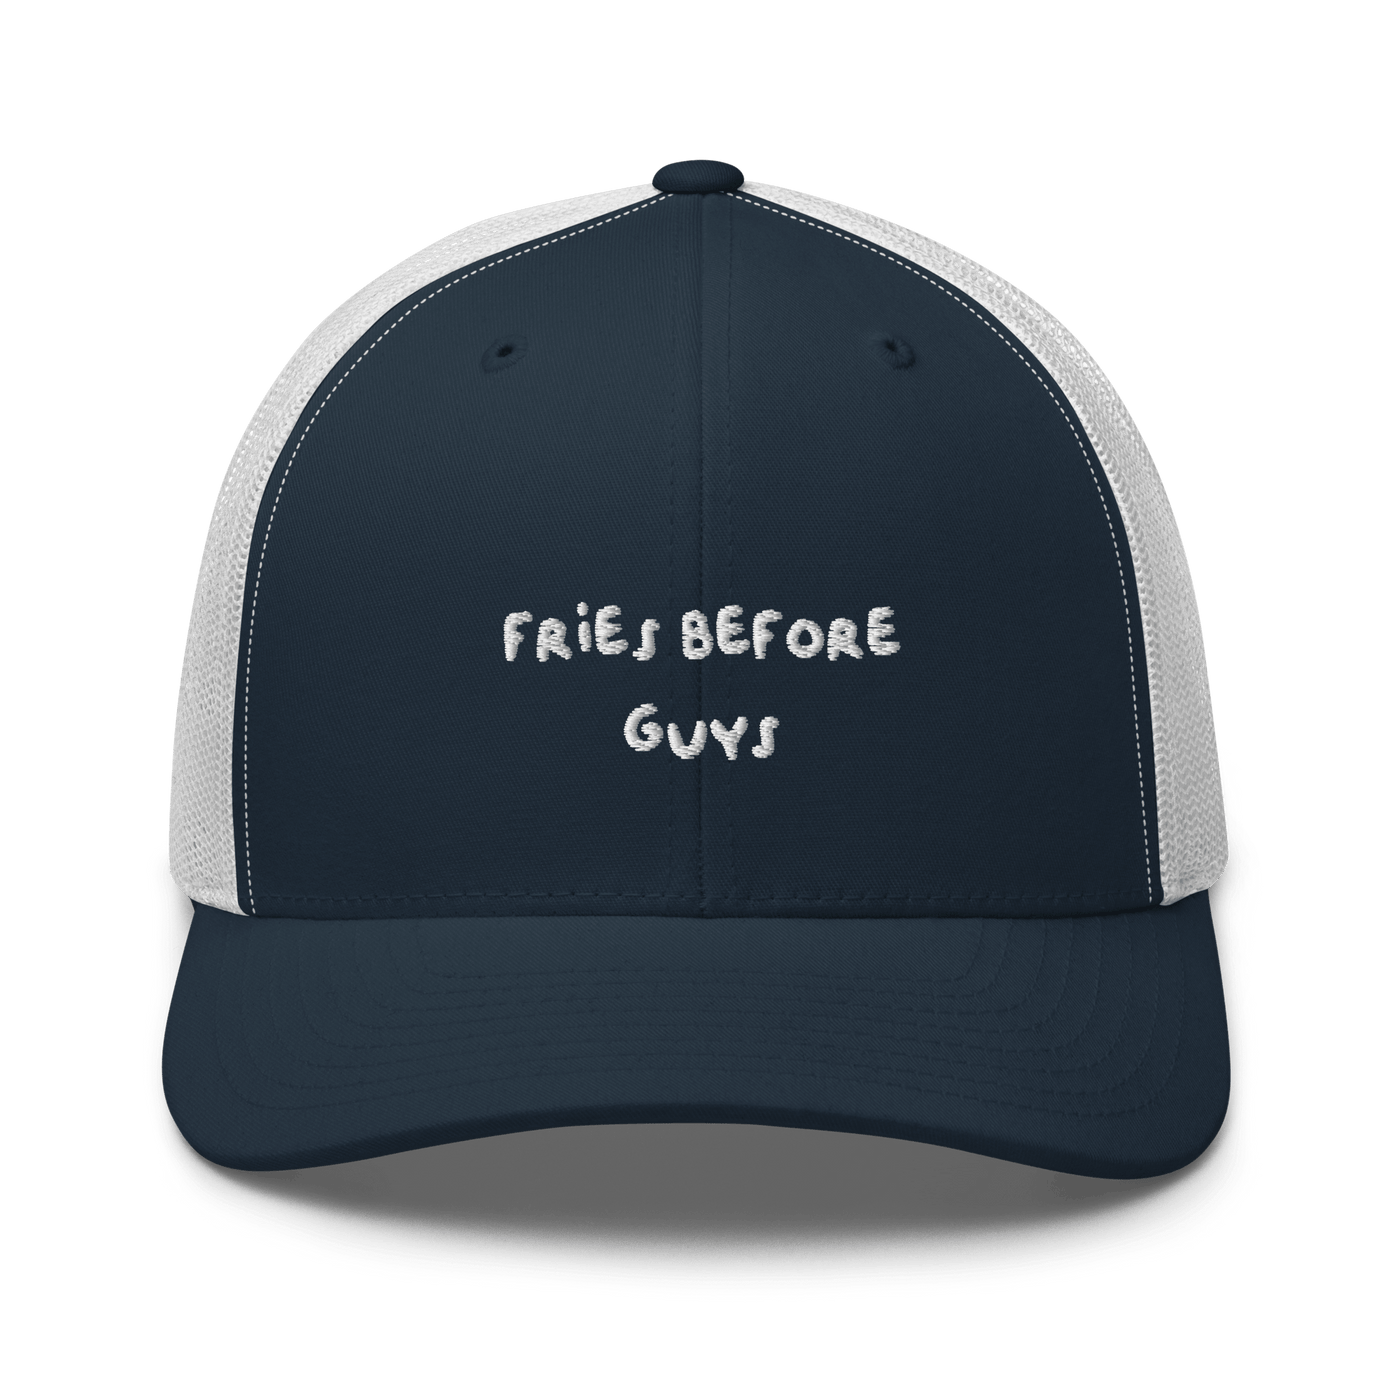 Fries Before Guys Trucker Cap - Navy/ White - - Just Another Cap Store